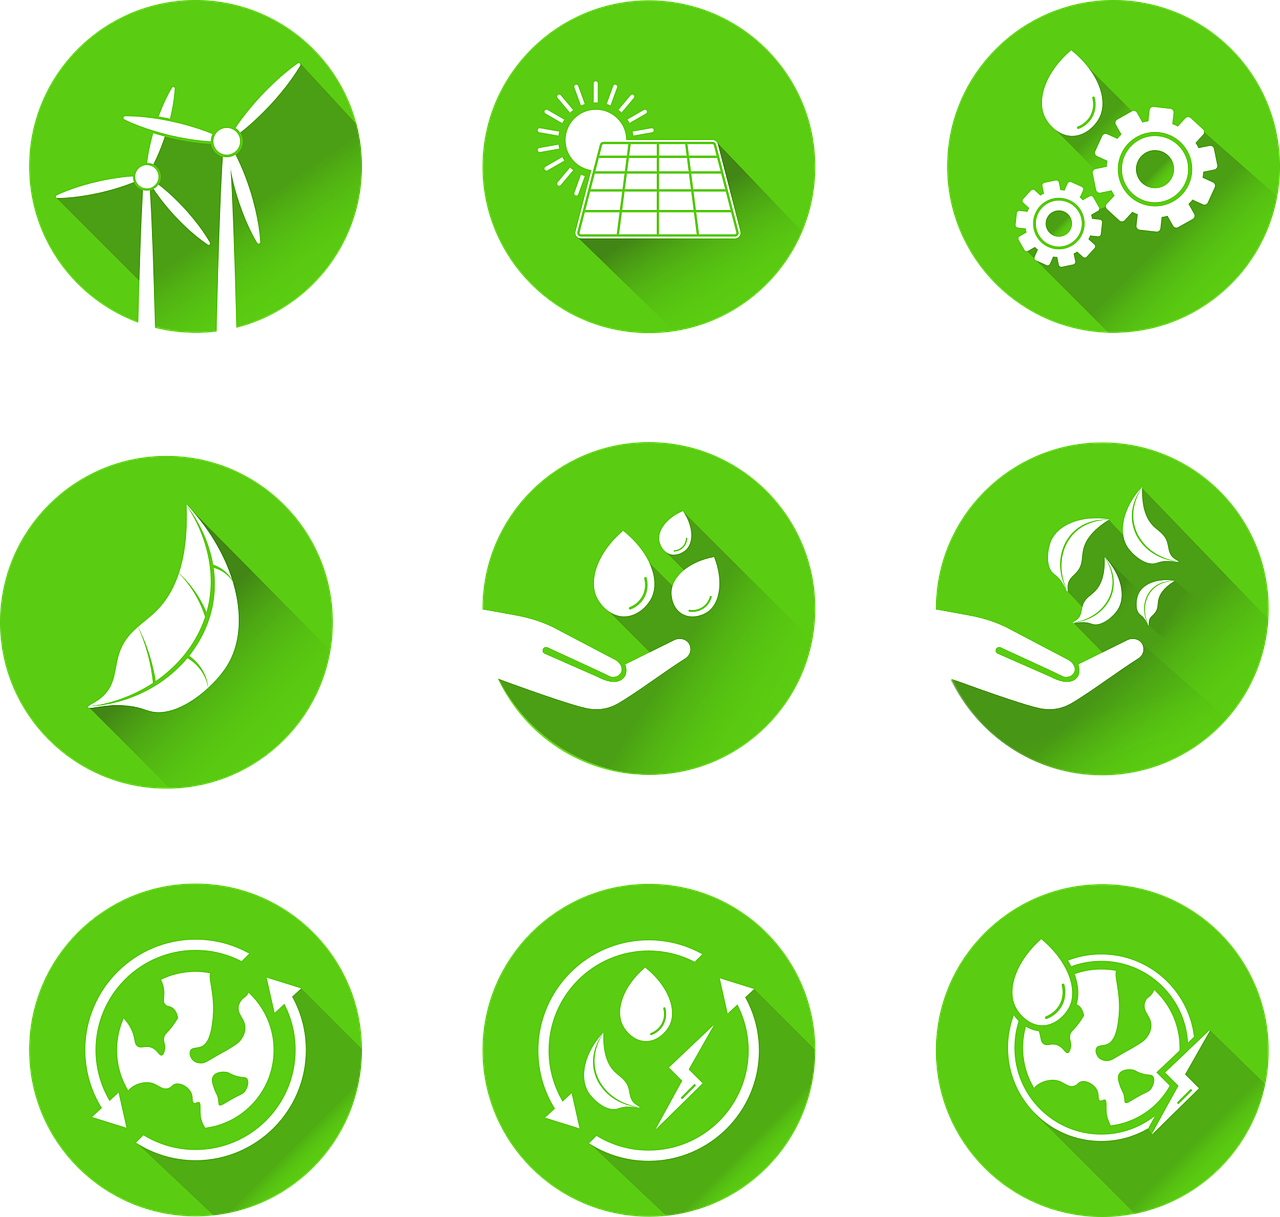 sustainability-icons-g806b756d1_1280